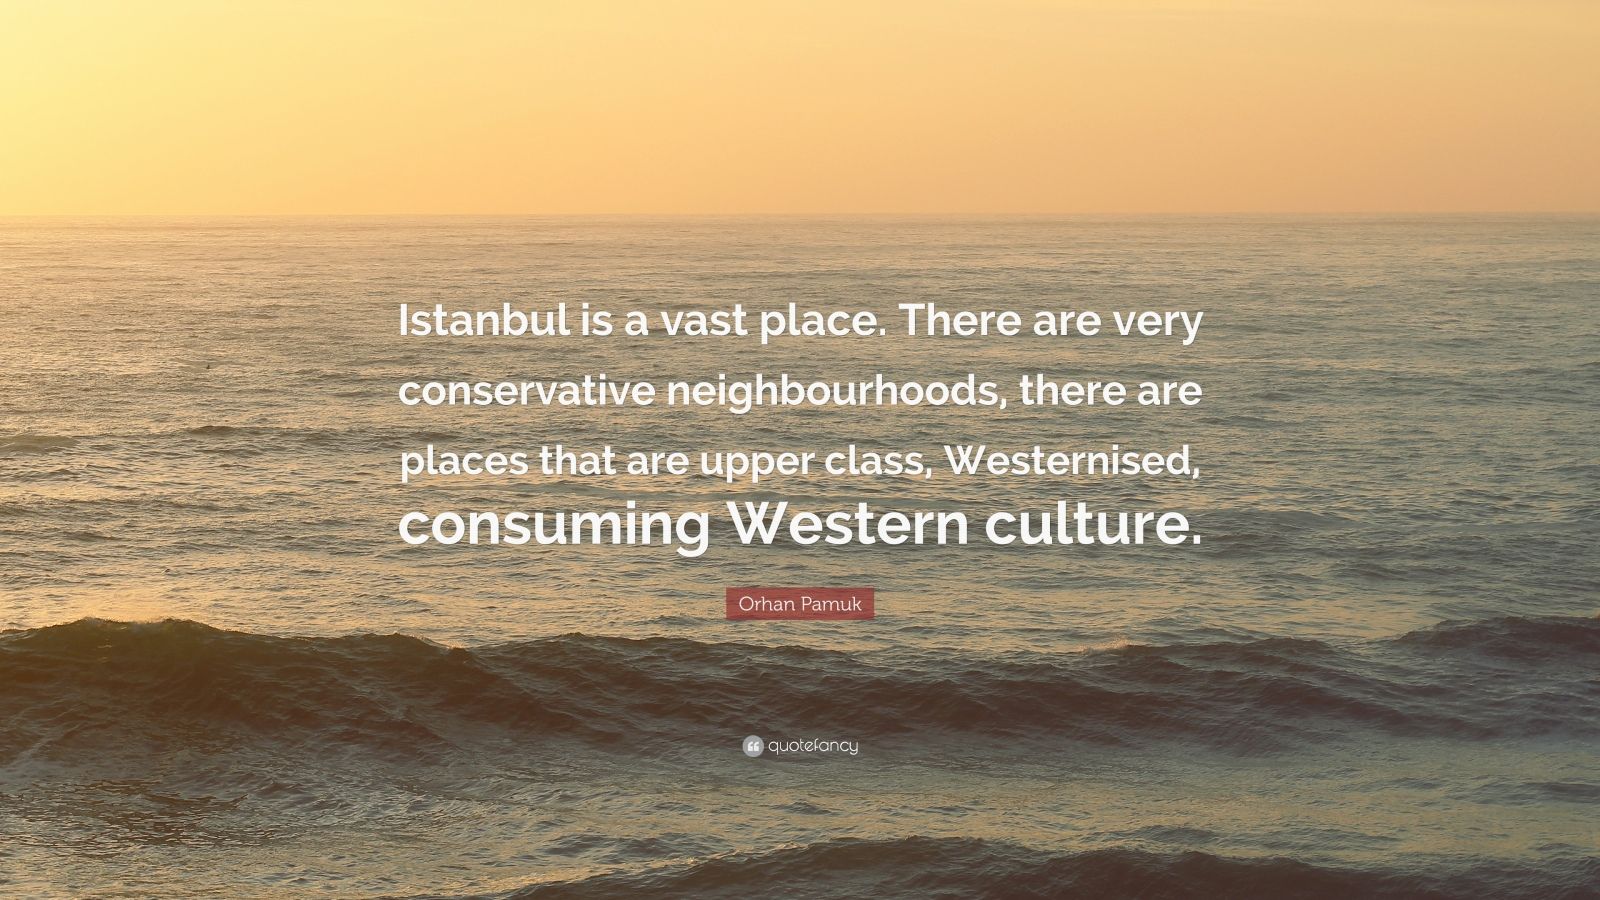 Orhan Pamuk Quote: “Istanbul is a vast place. There are very